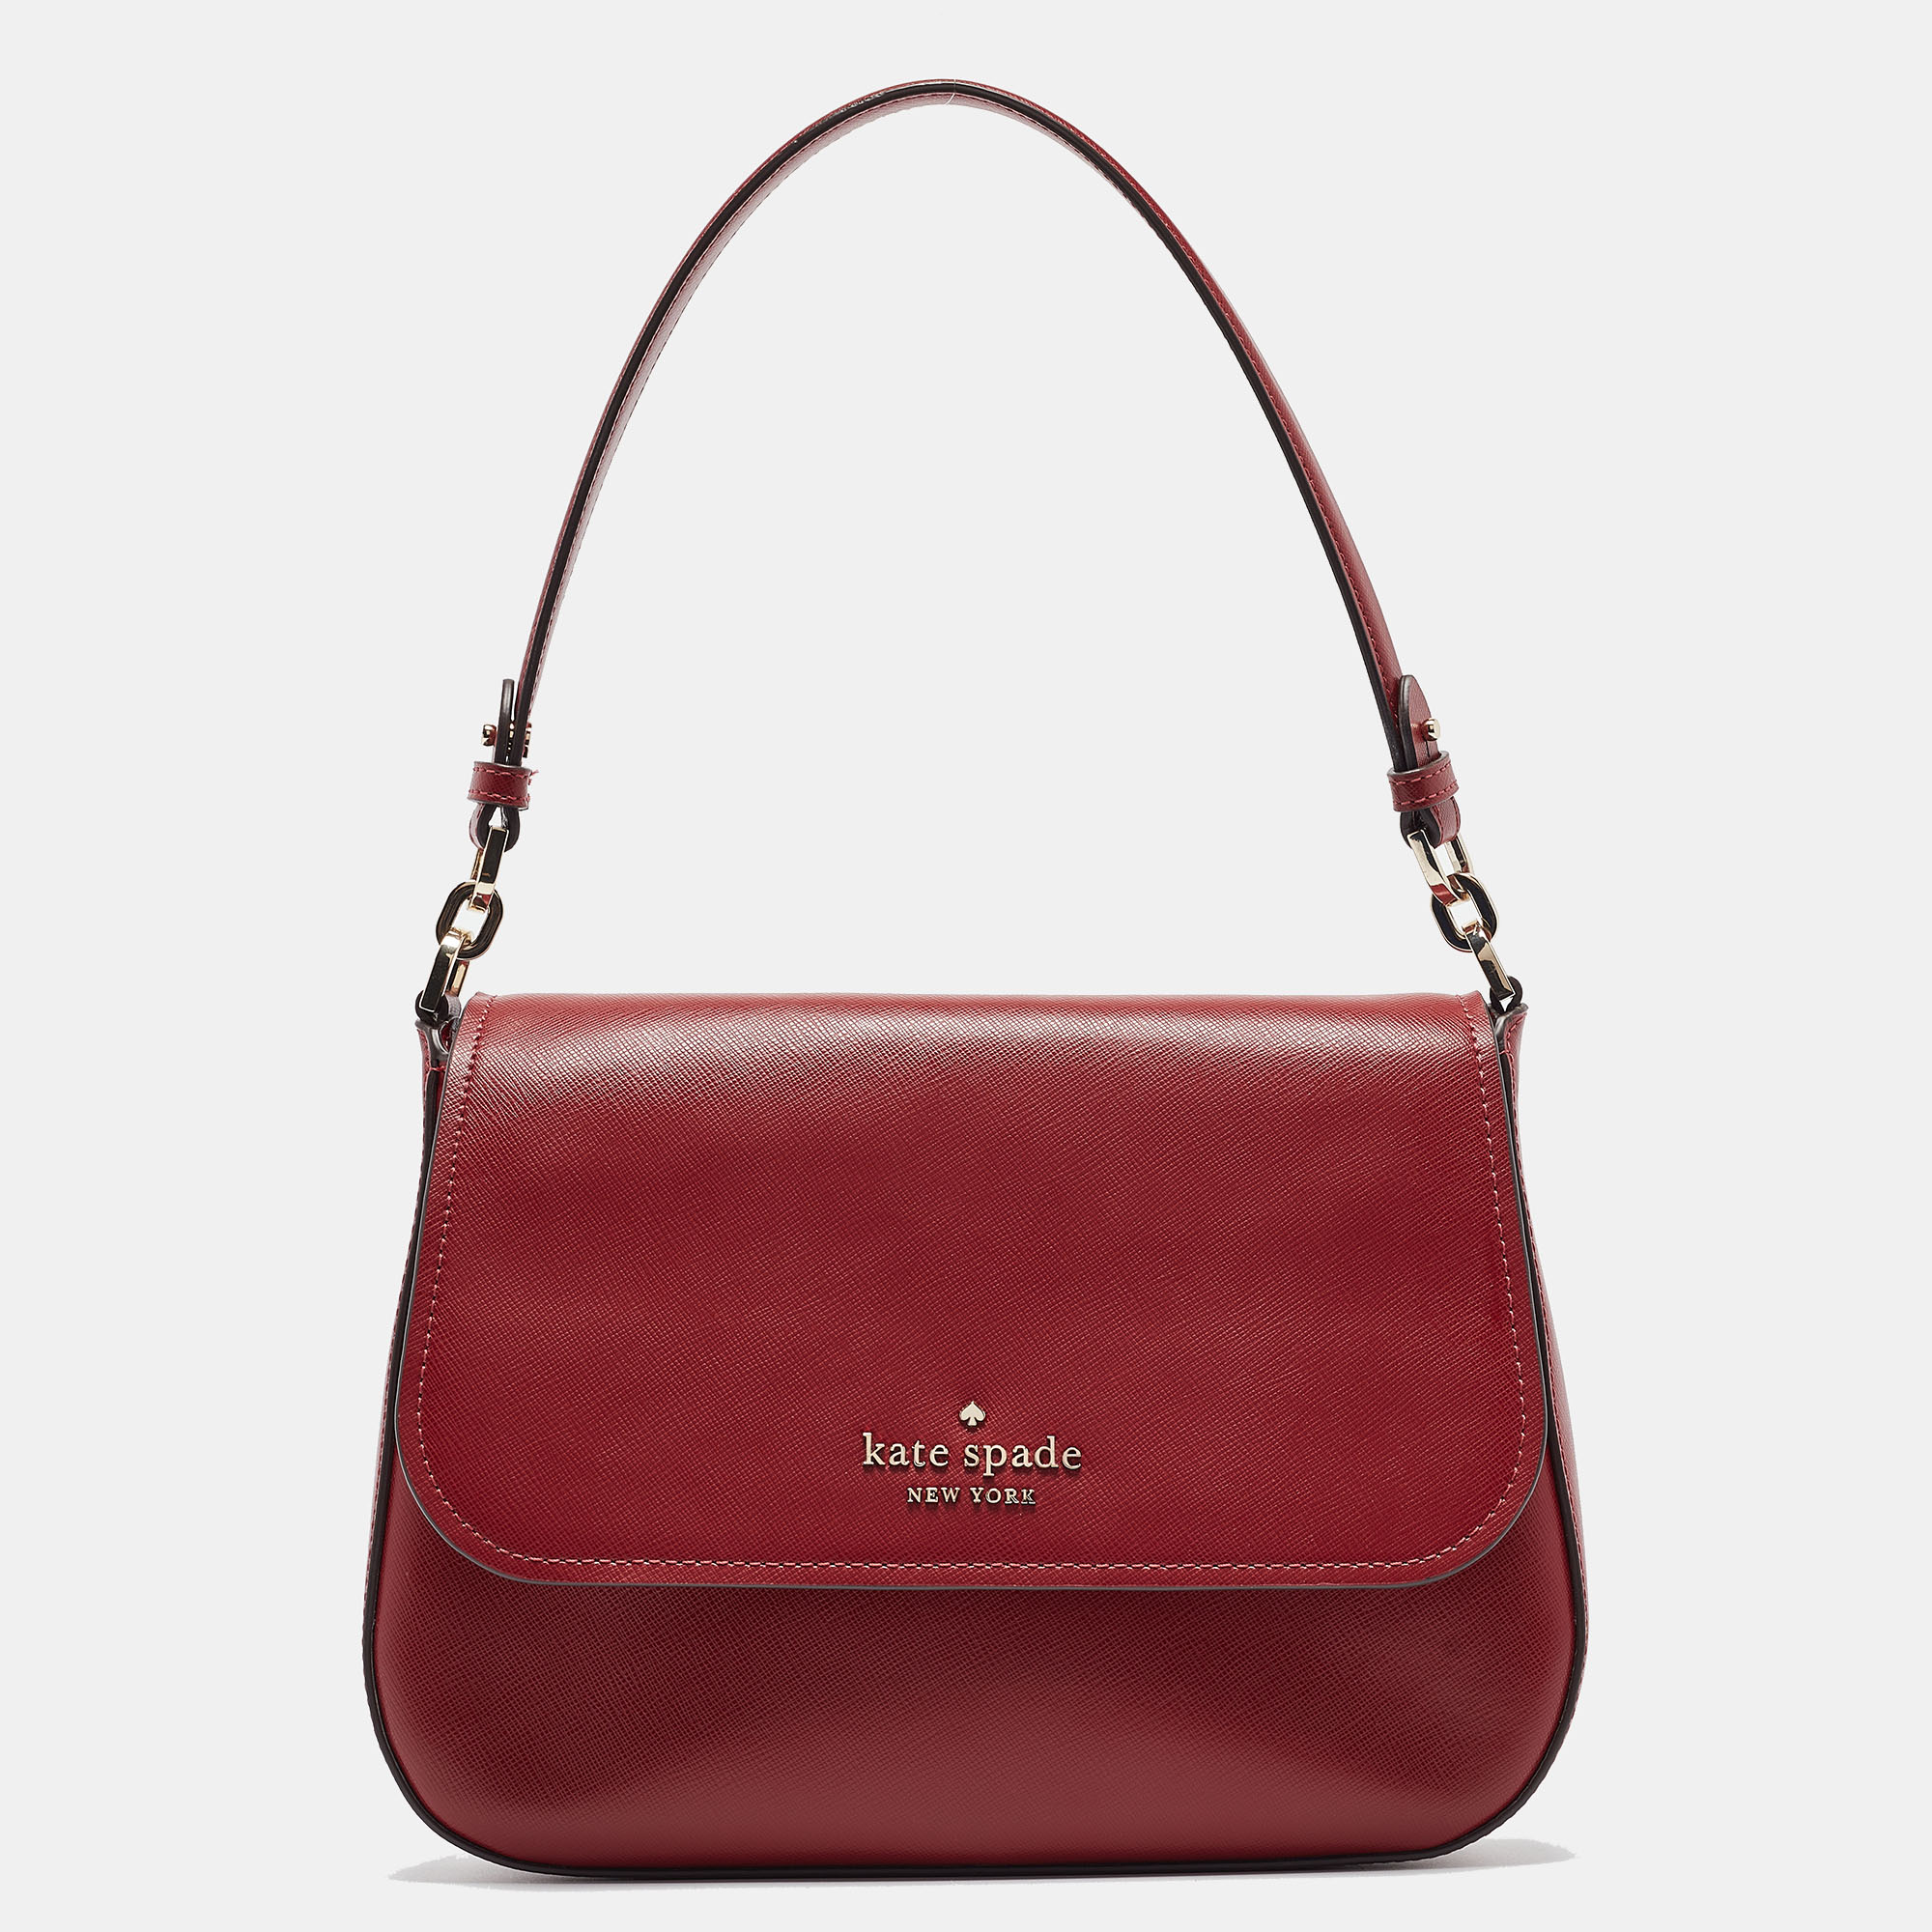 Perfect for conveniently housing your essentials in one place this Kate Spade red shoulder bag is a worthy investment. It has notable details and offers a look of luxury.